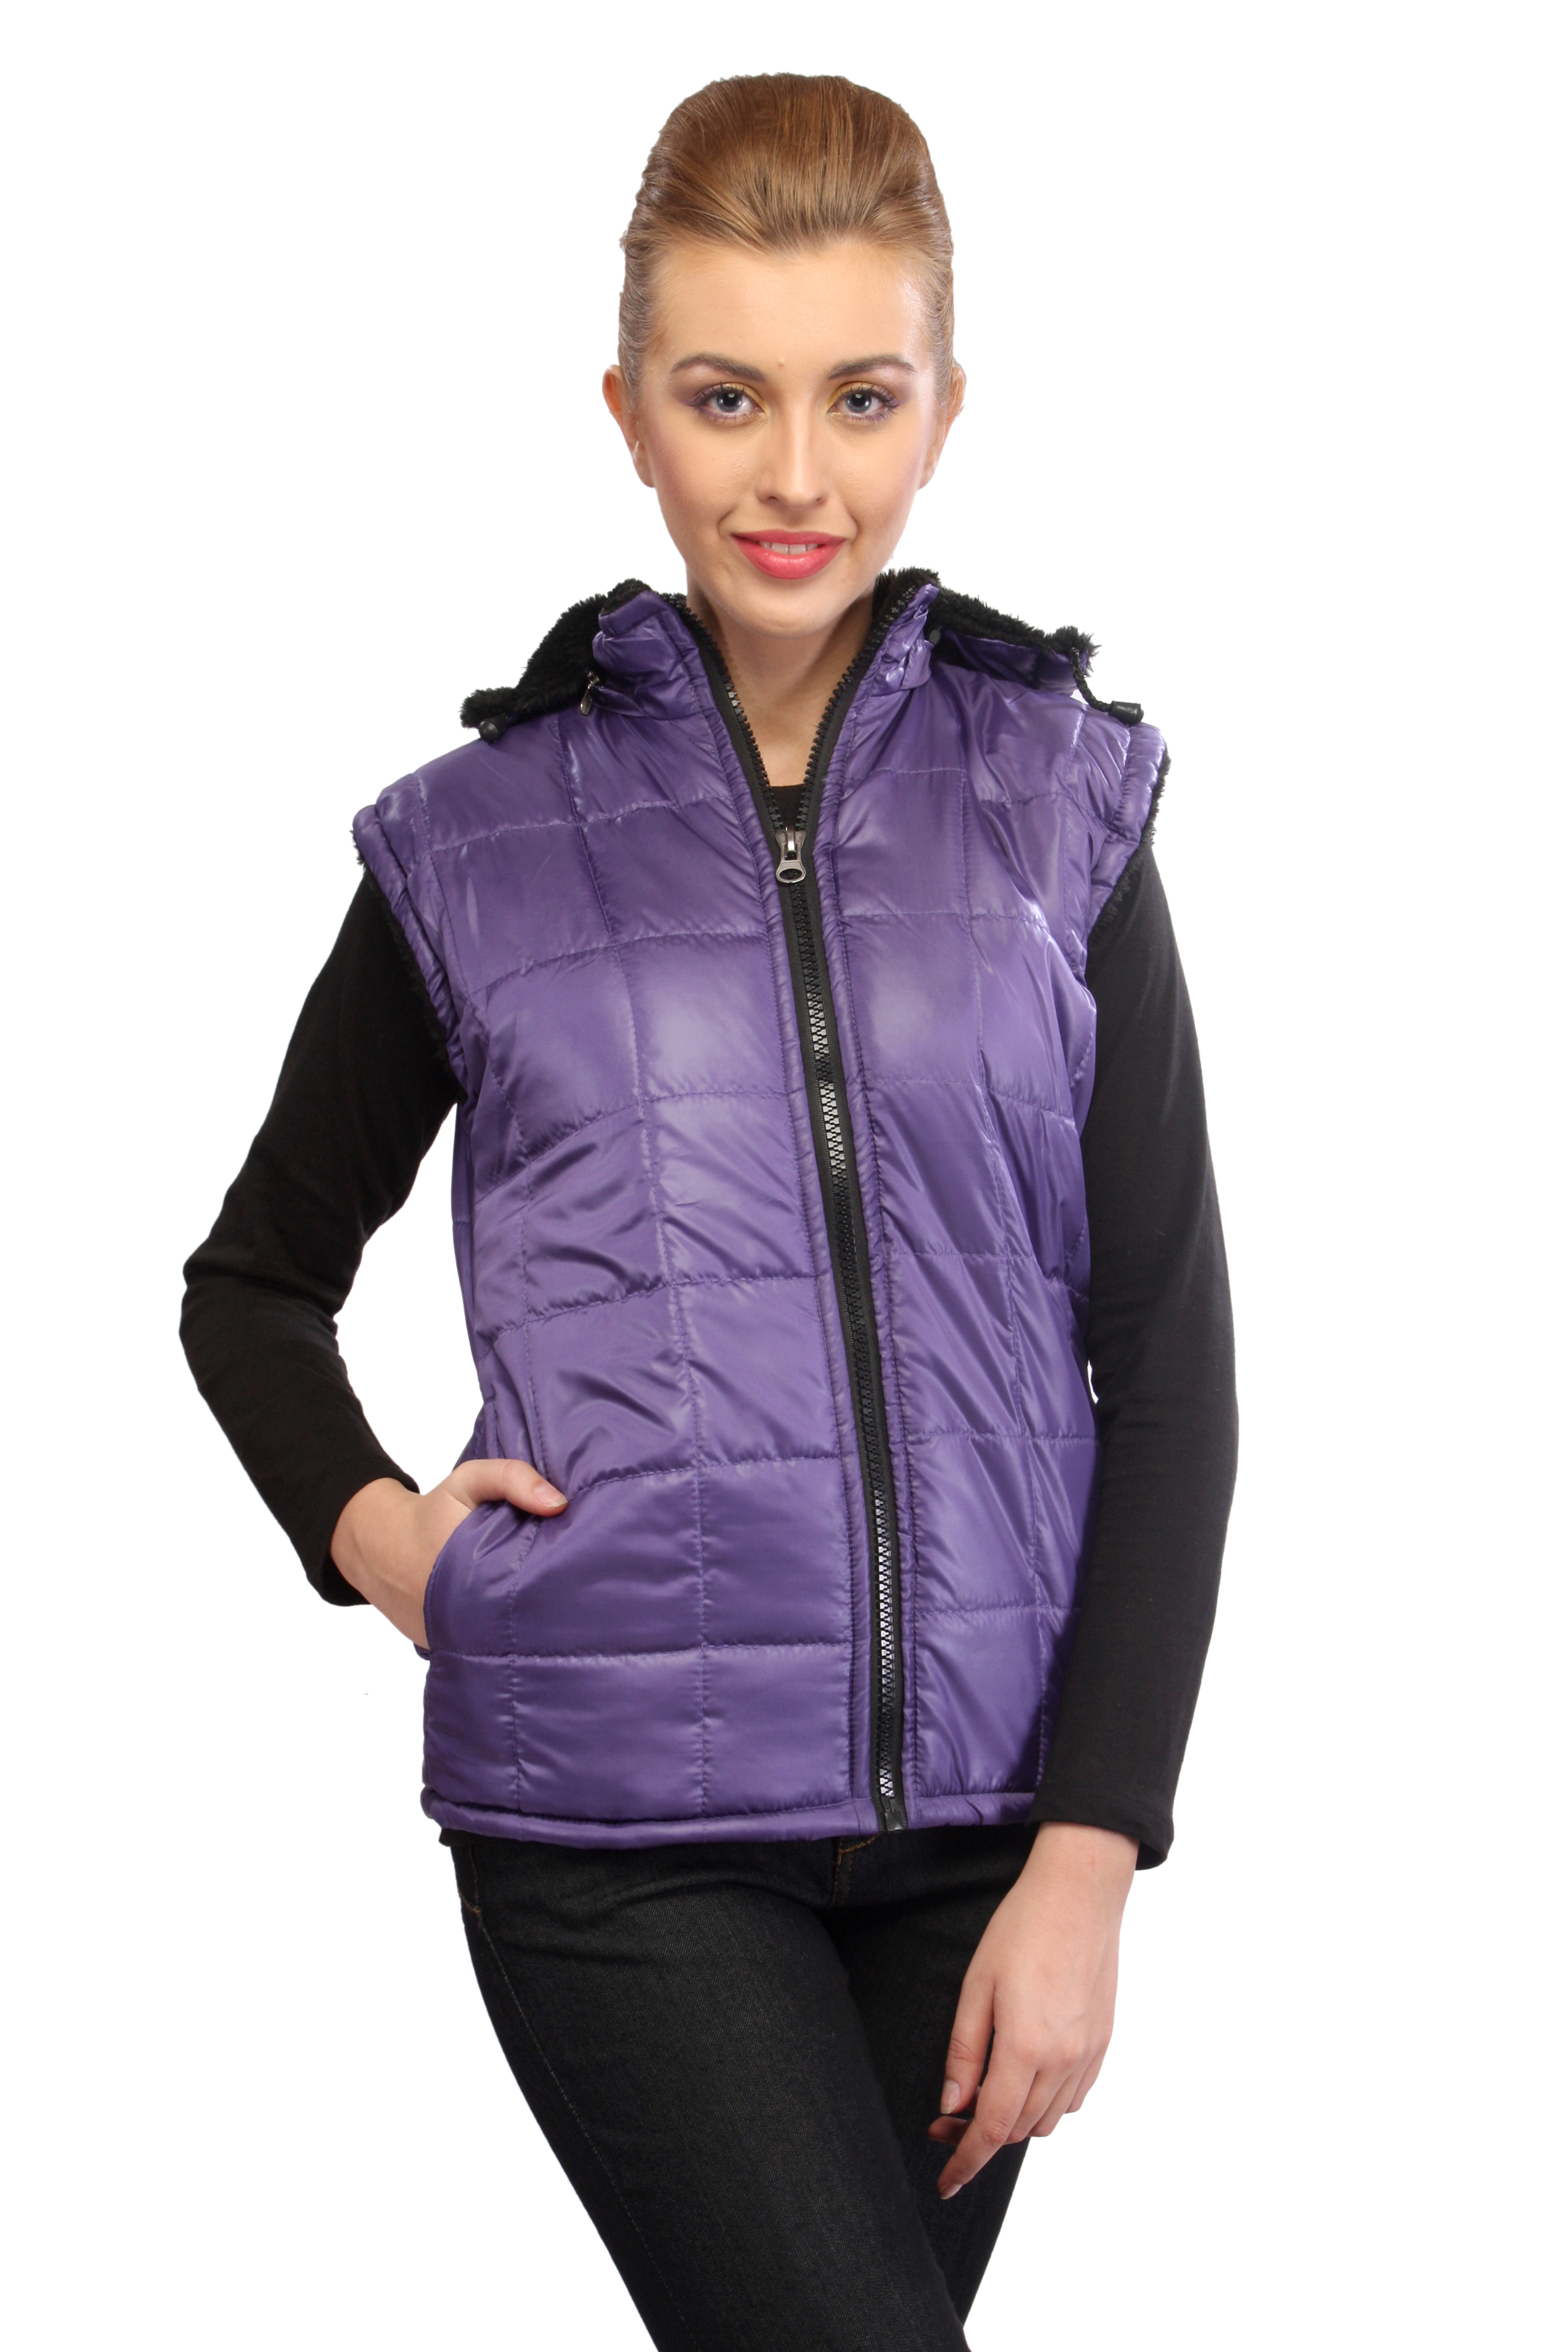 Lavennder Pu Jacket With Hood 41028 at Best Prices - Shopclues Online ...